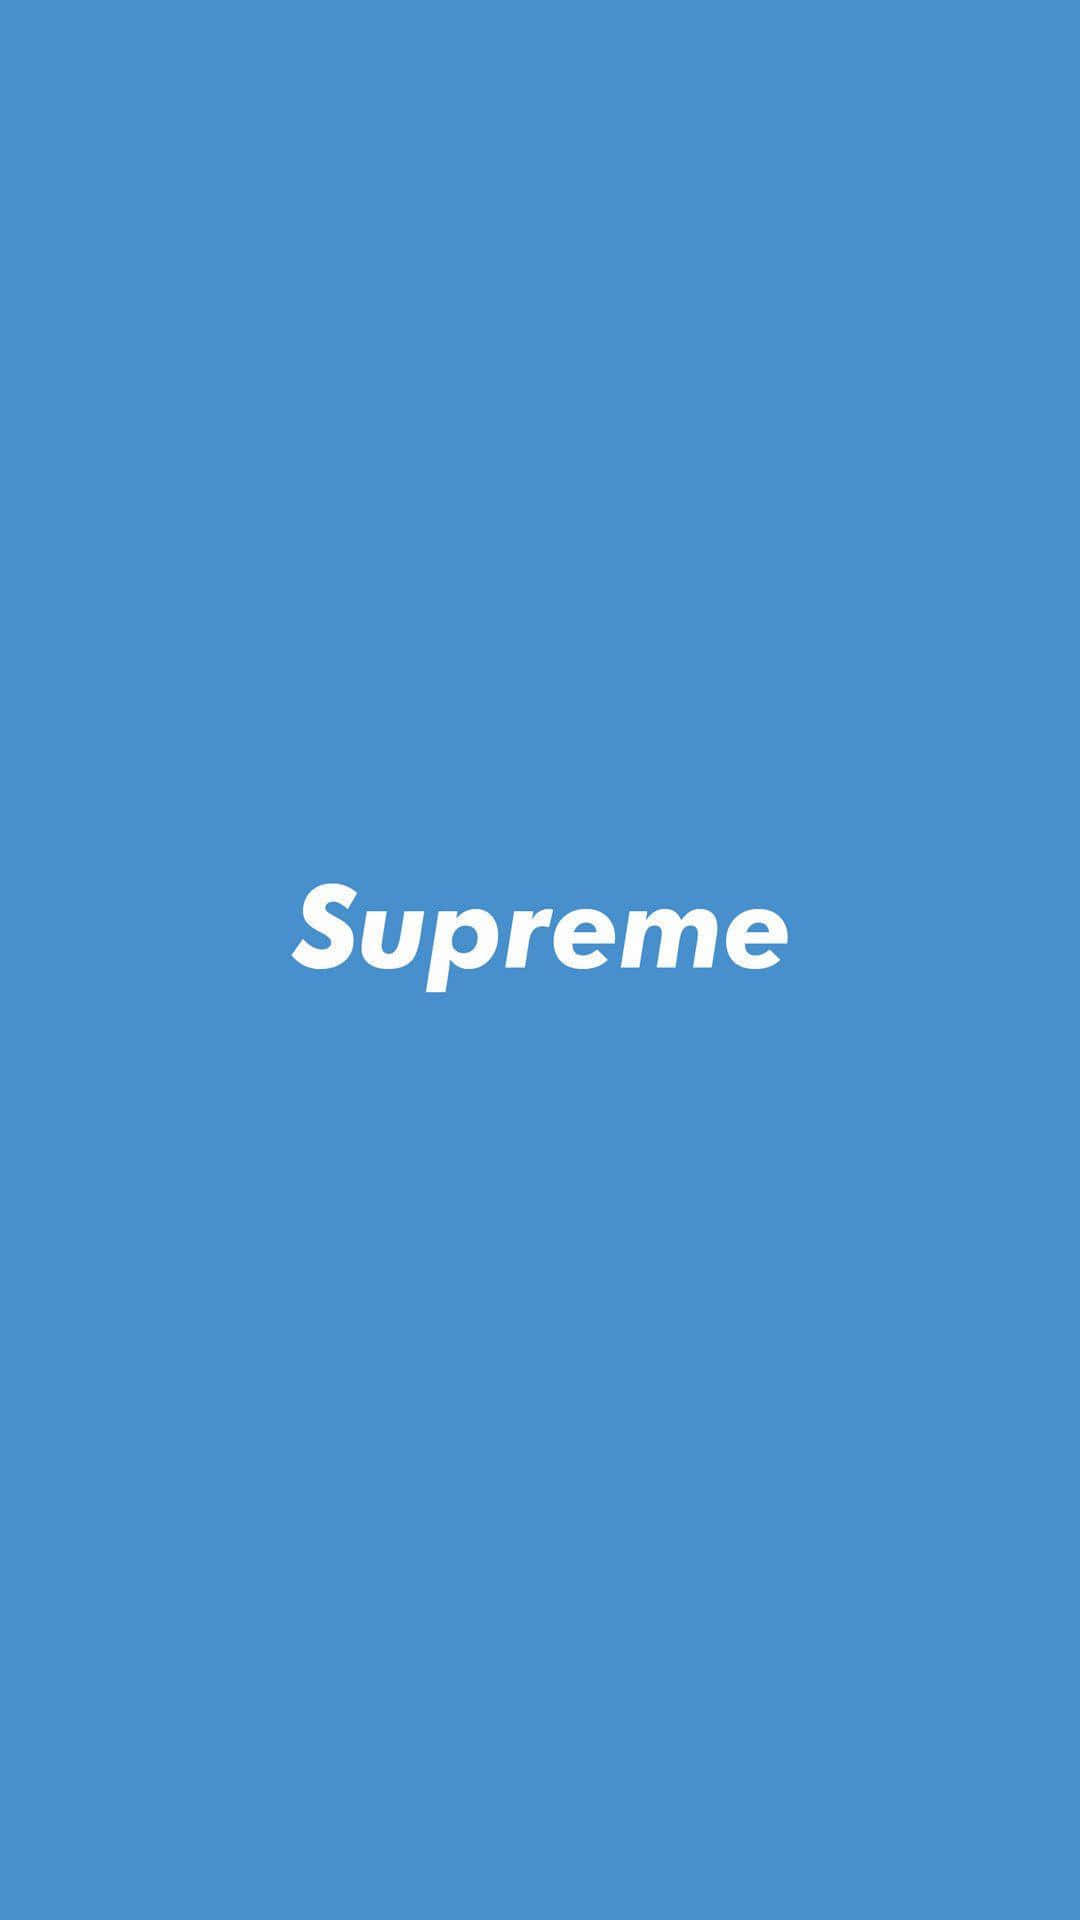 Step Up Your Style with Blue Hypebeast Wallpaper